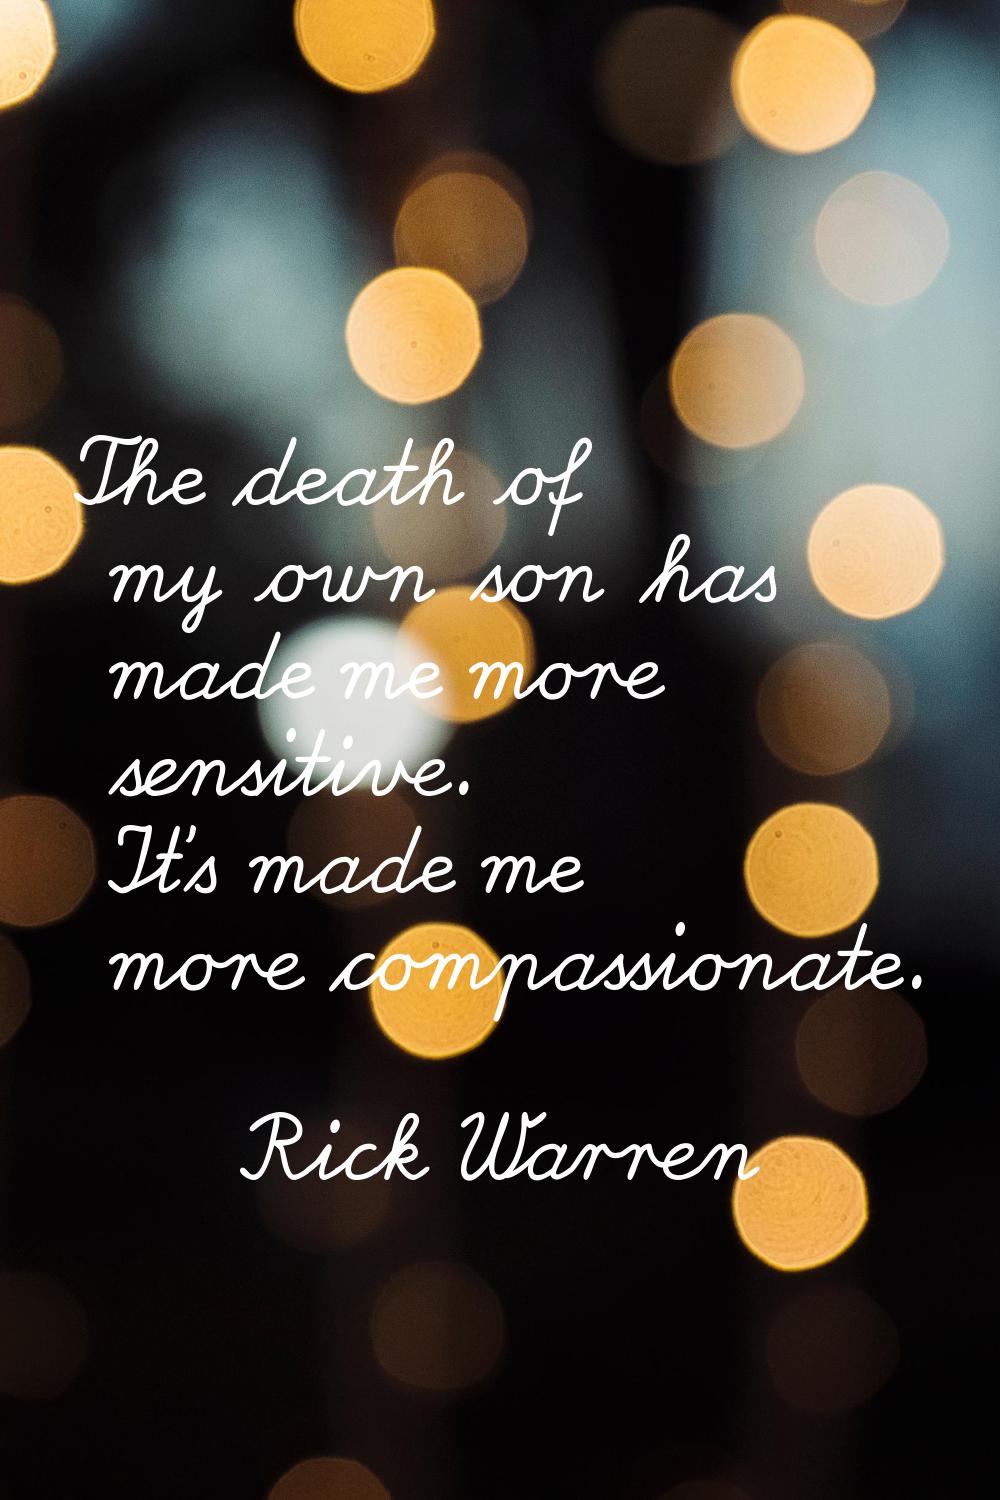 The death of my own son has made me more sensitive. It's made me more compassionate.